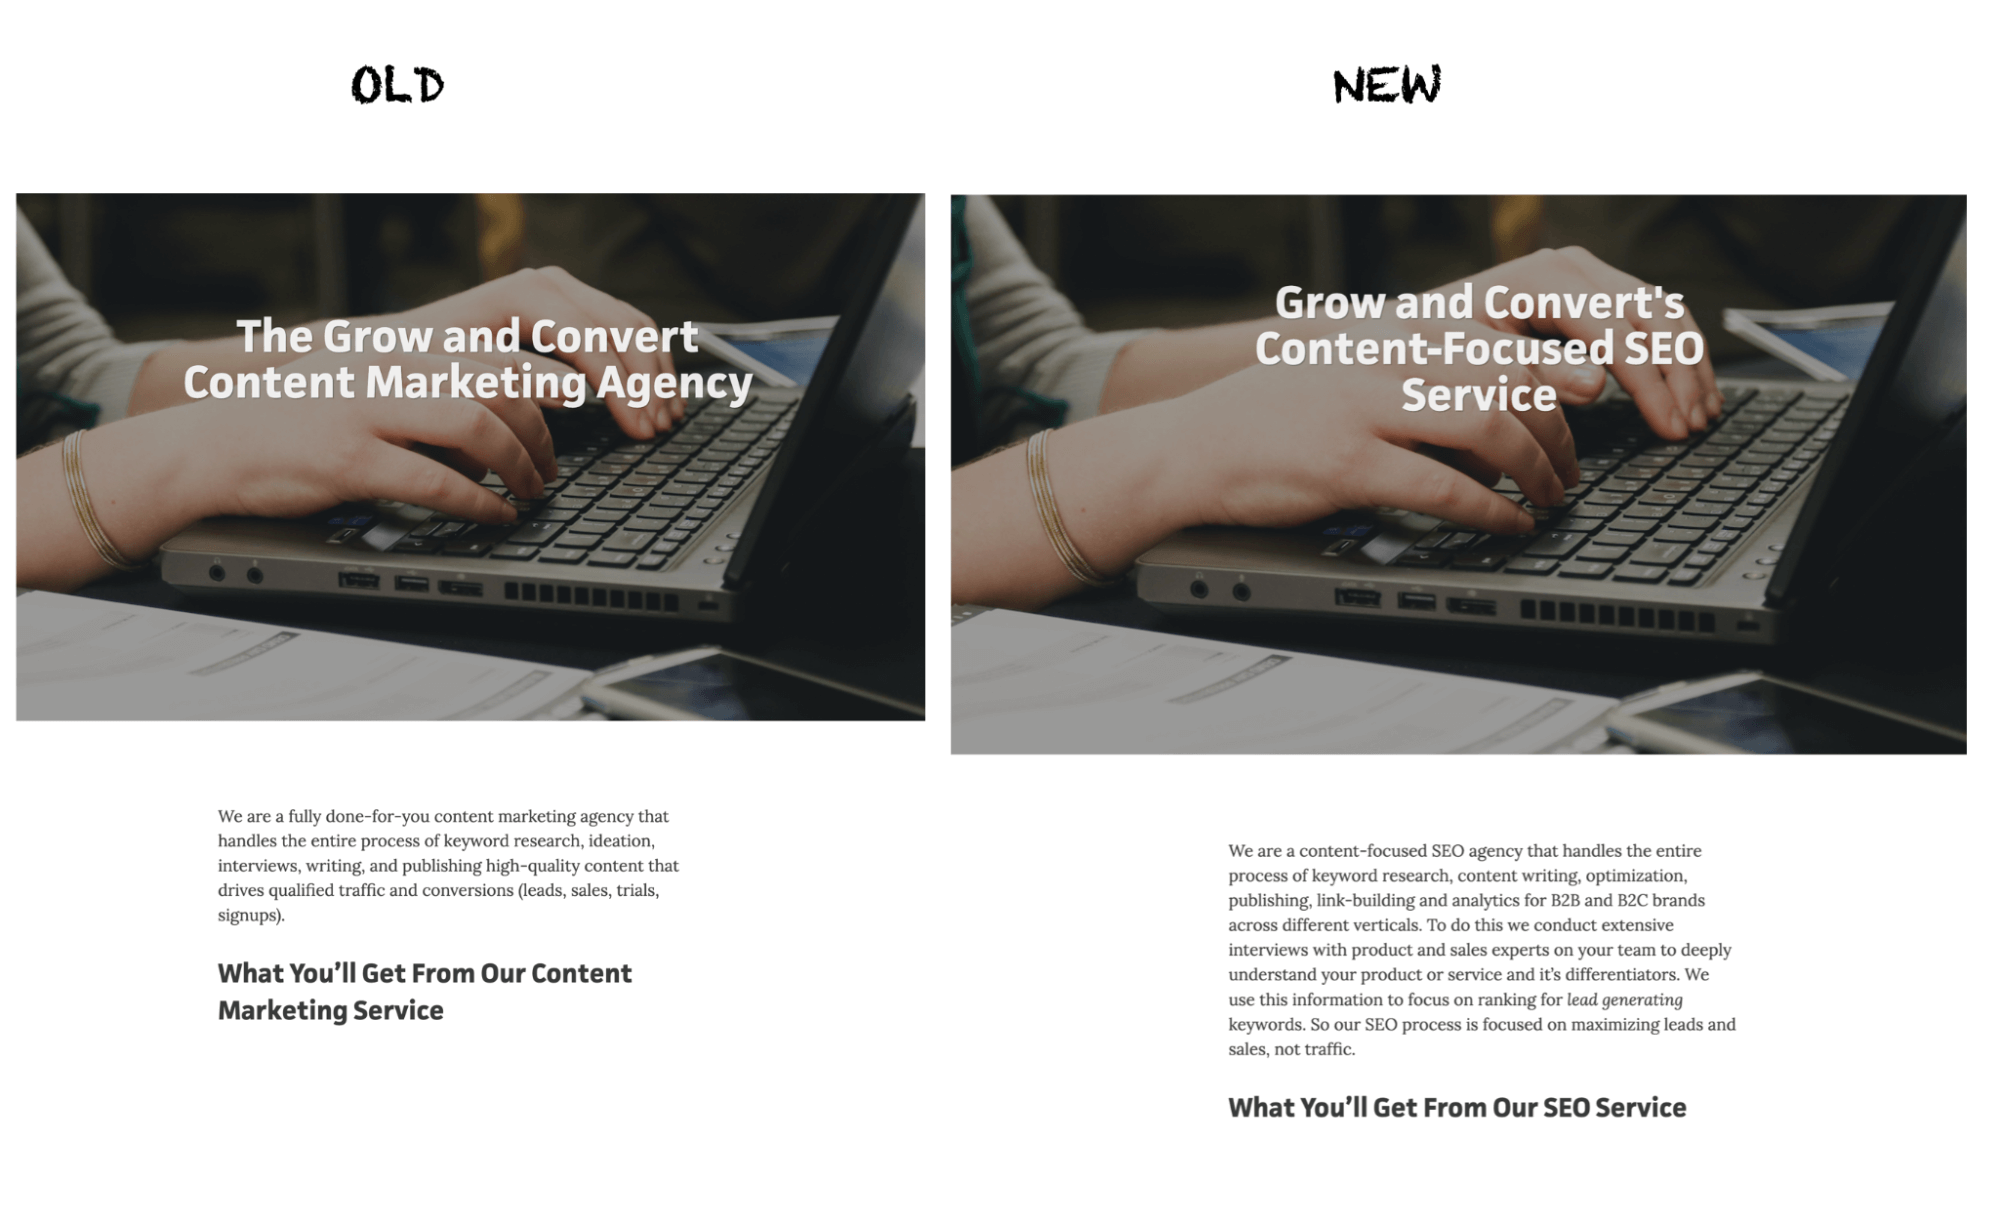 Old vs New "Work With Us" Positioning for Grow and Convert: What You'll Get from Our SEO Service